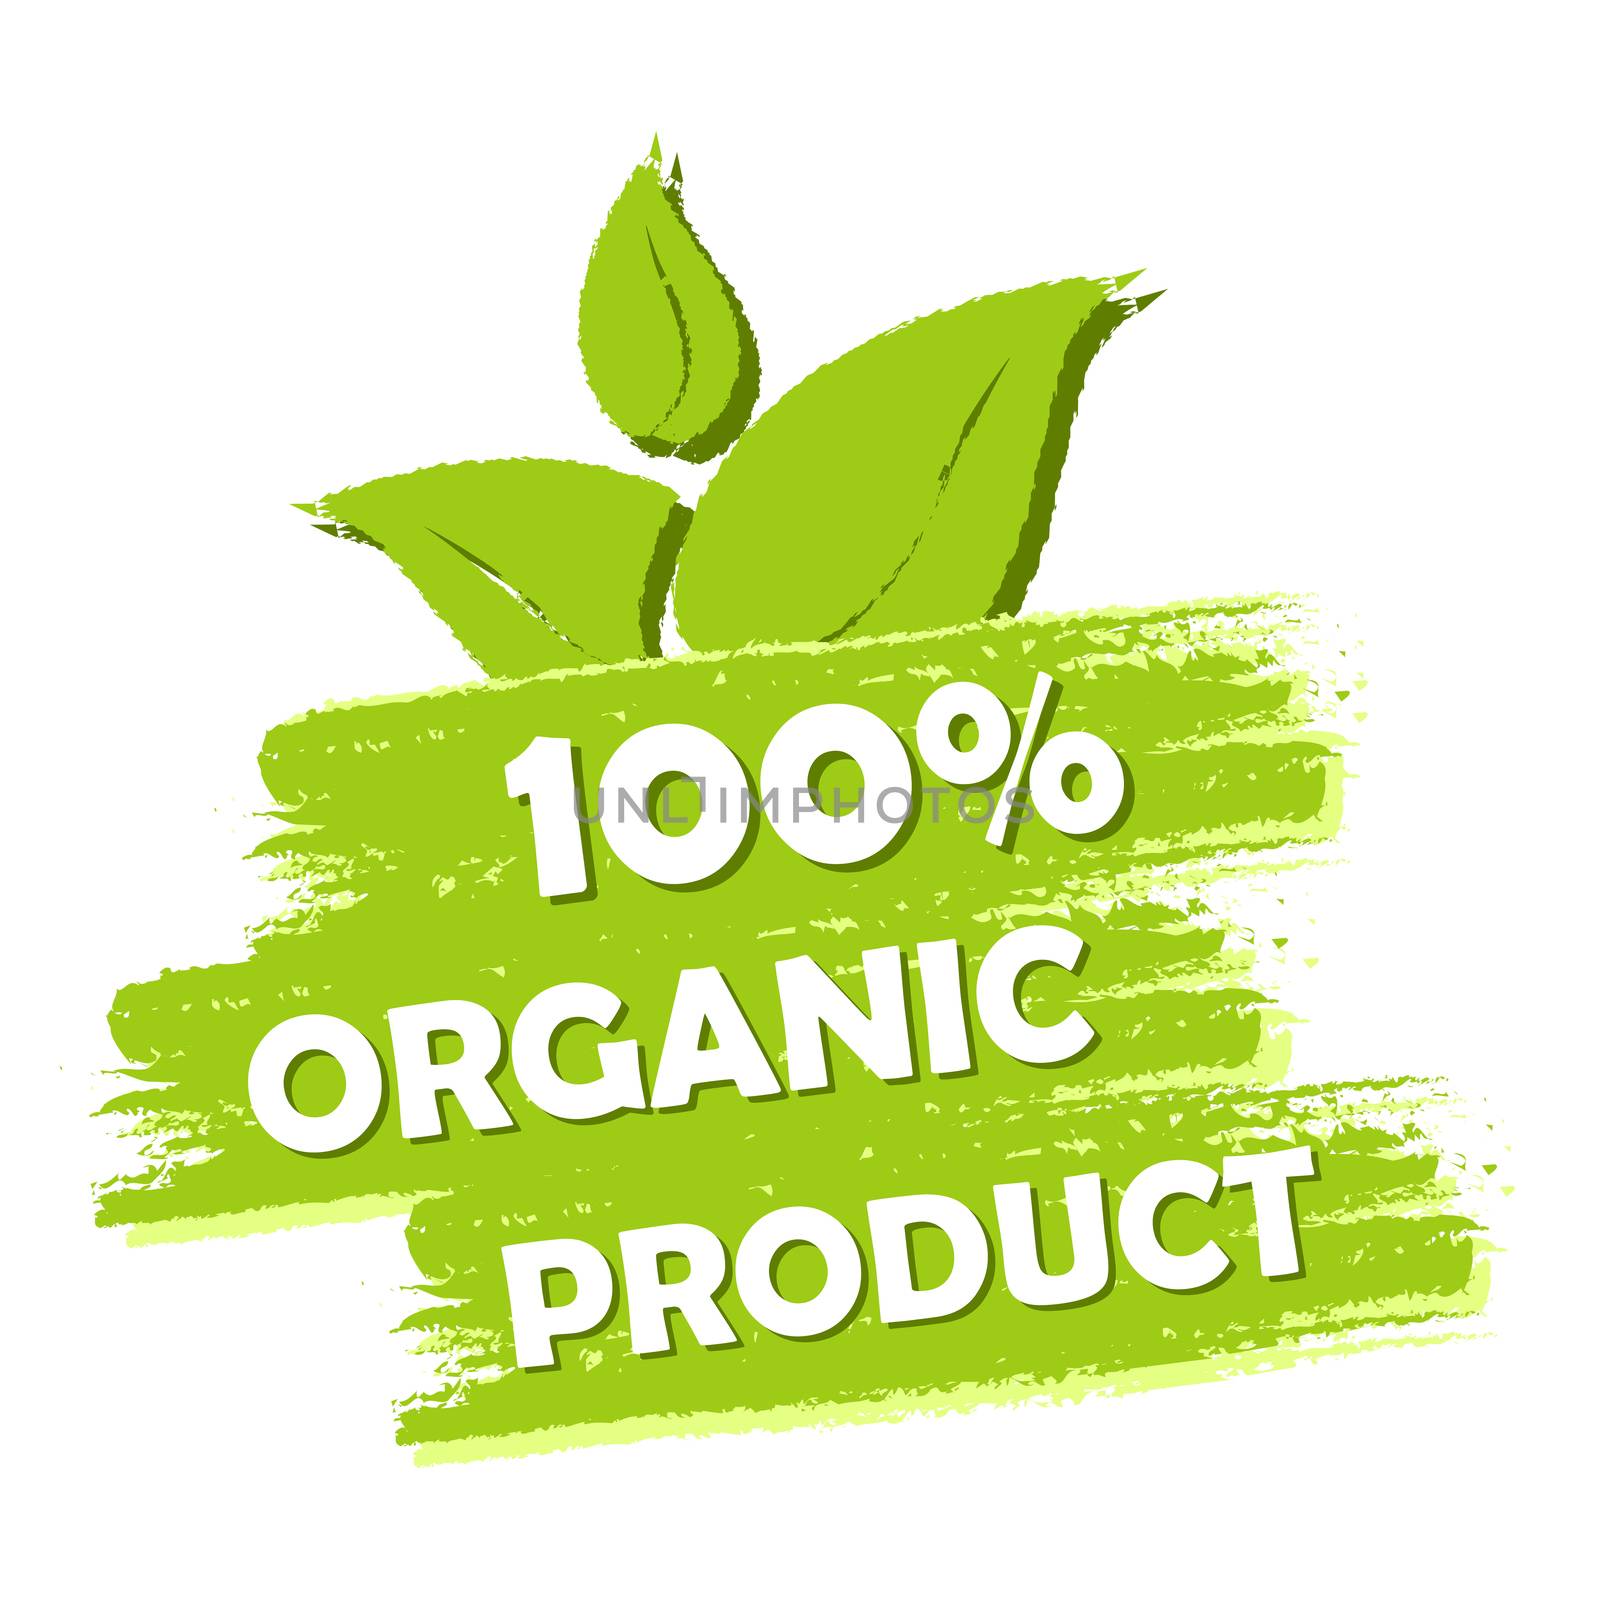 100 percent organic product with leaf sign banner, green drawn label with text and symbol, business eco bio concept